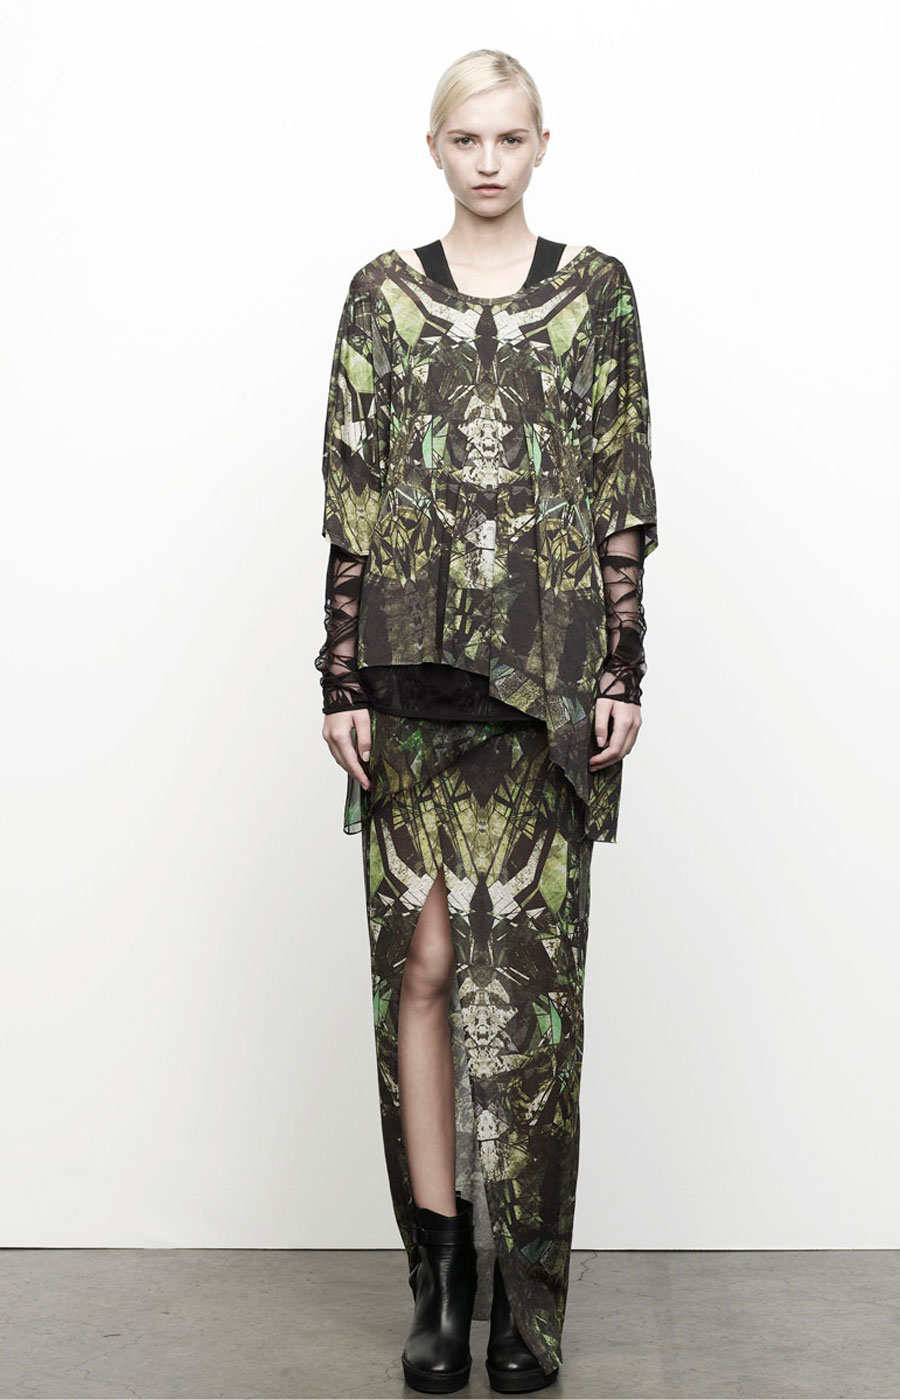 Pre-Fall 2012/2013 by Helmut Lang (10)